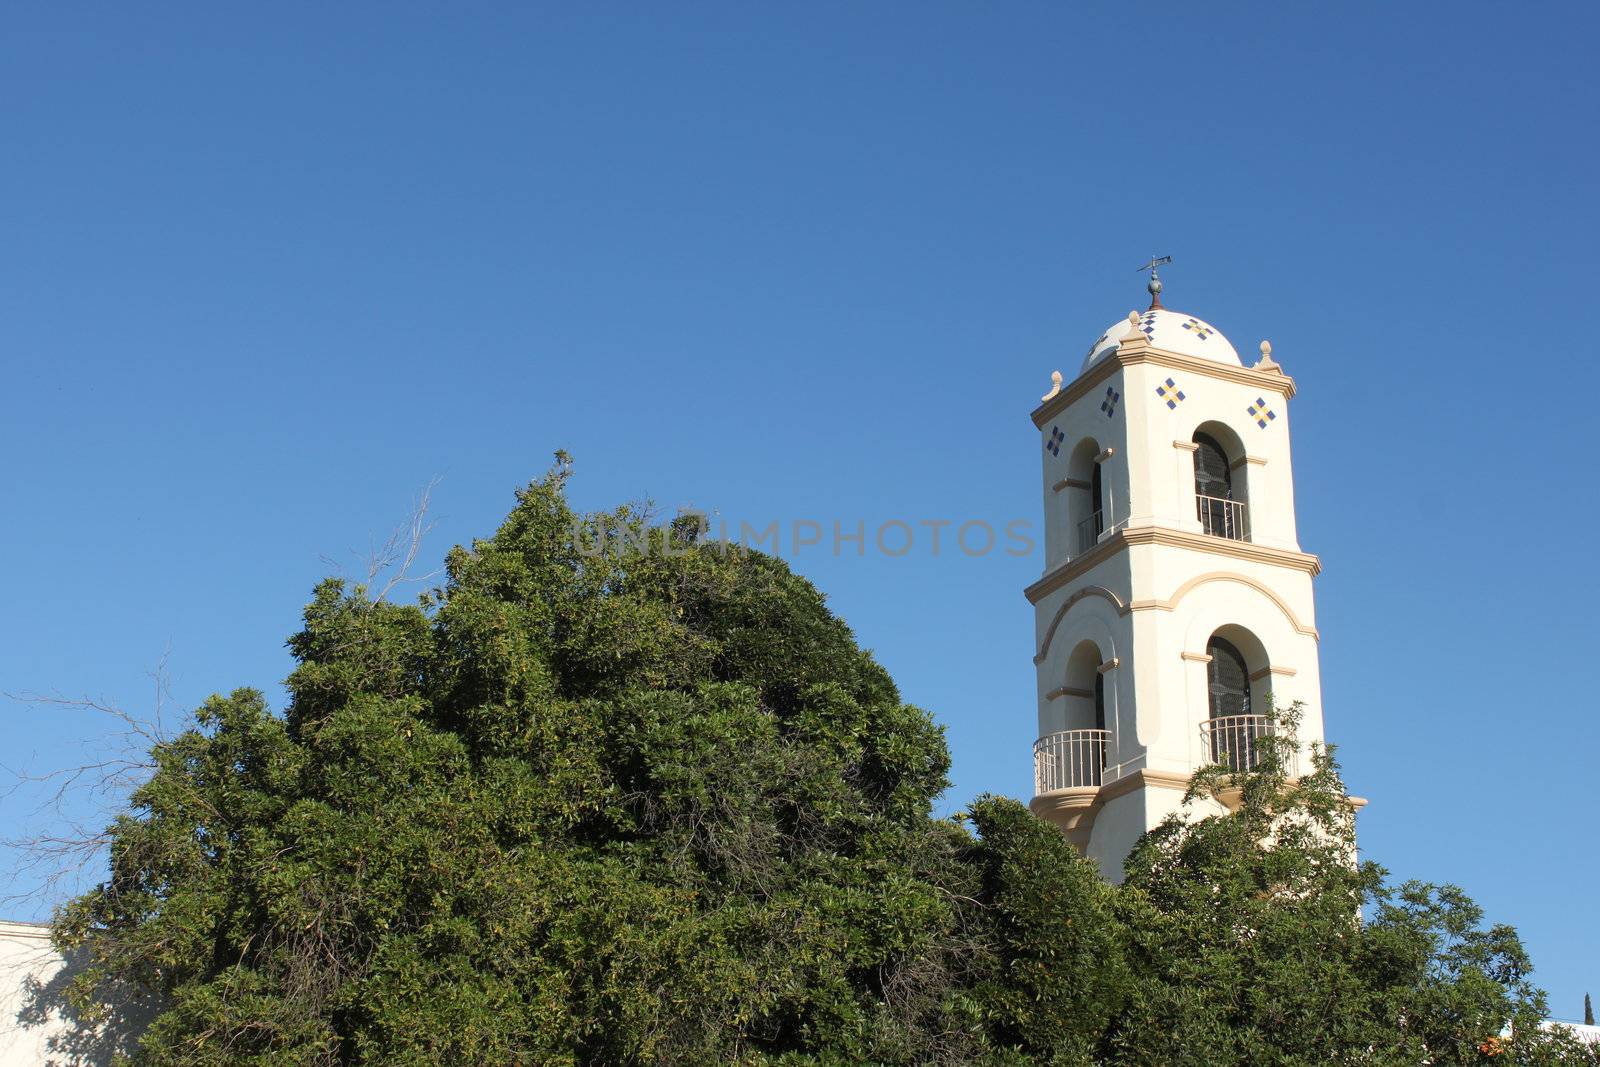 The Ojai Post Office Tower with a beautiful blue sky in the background.